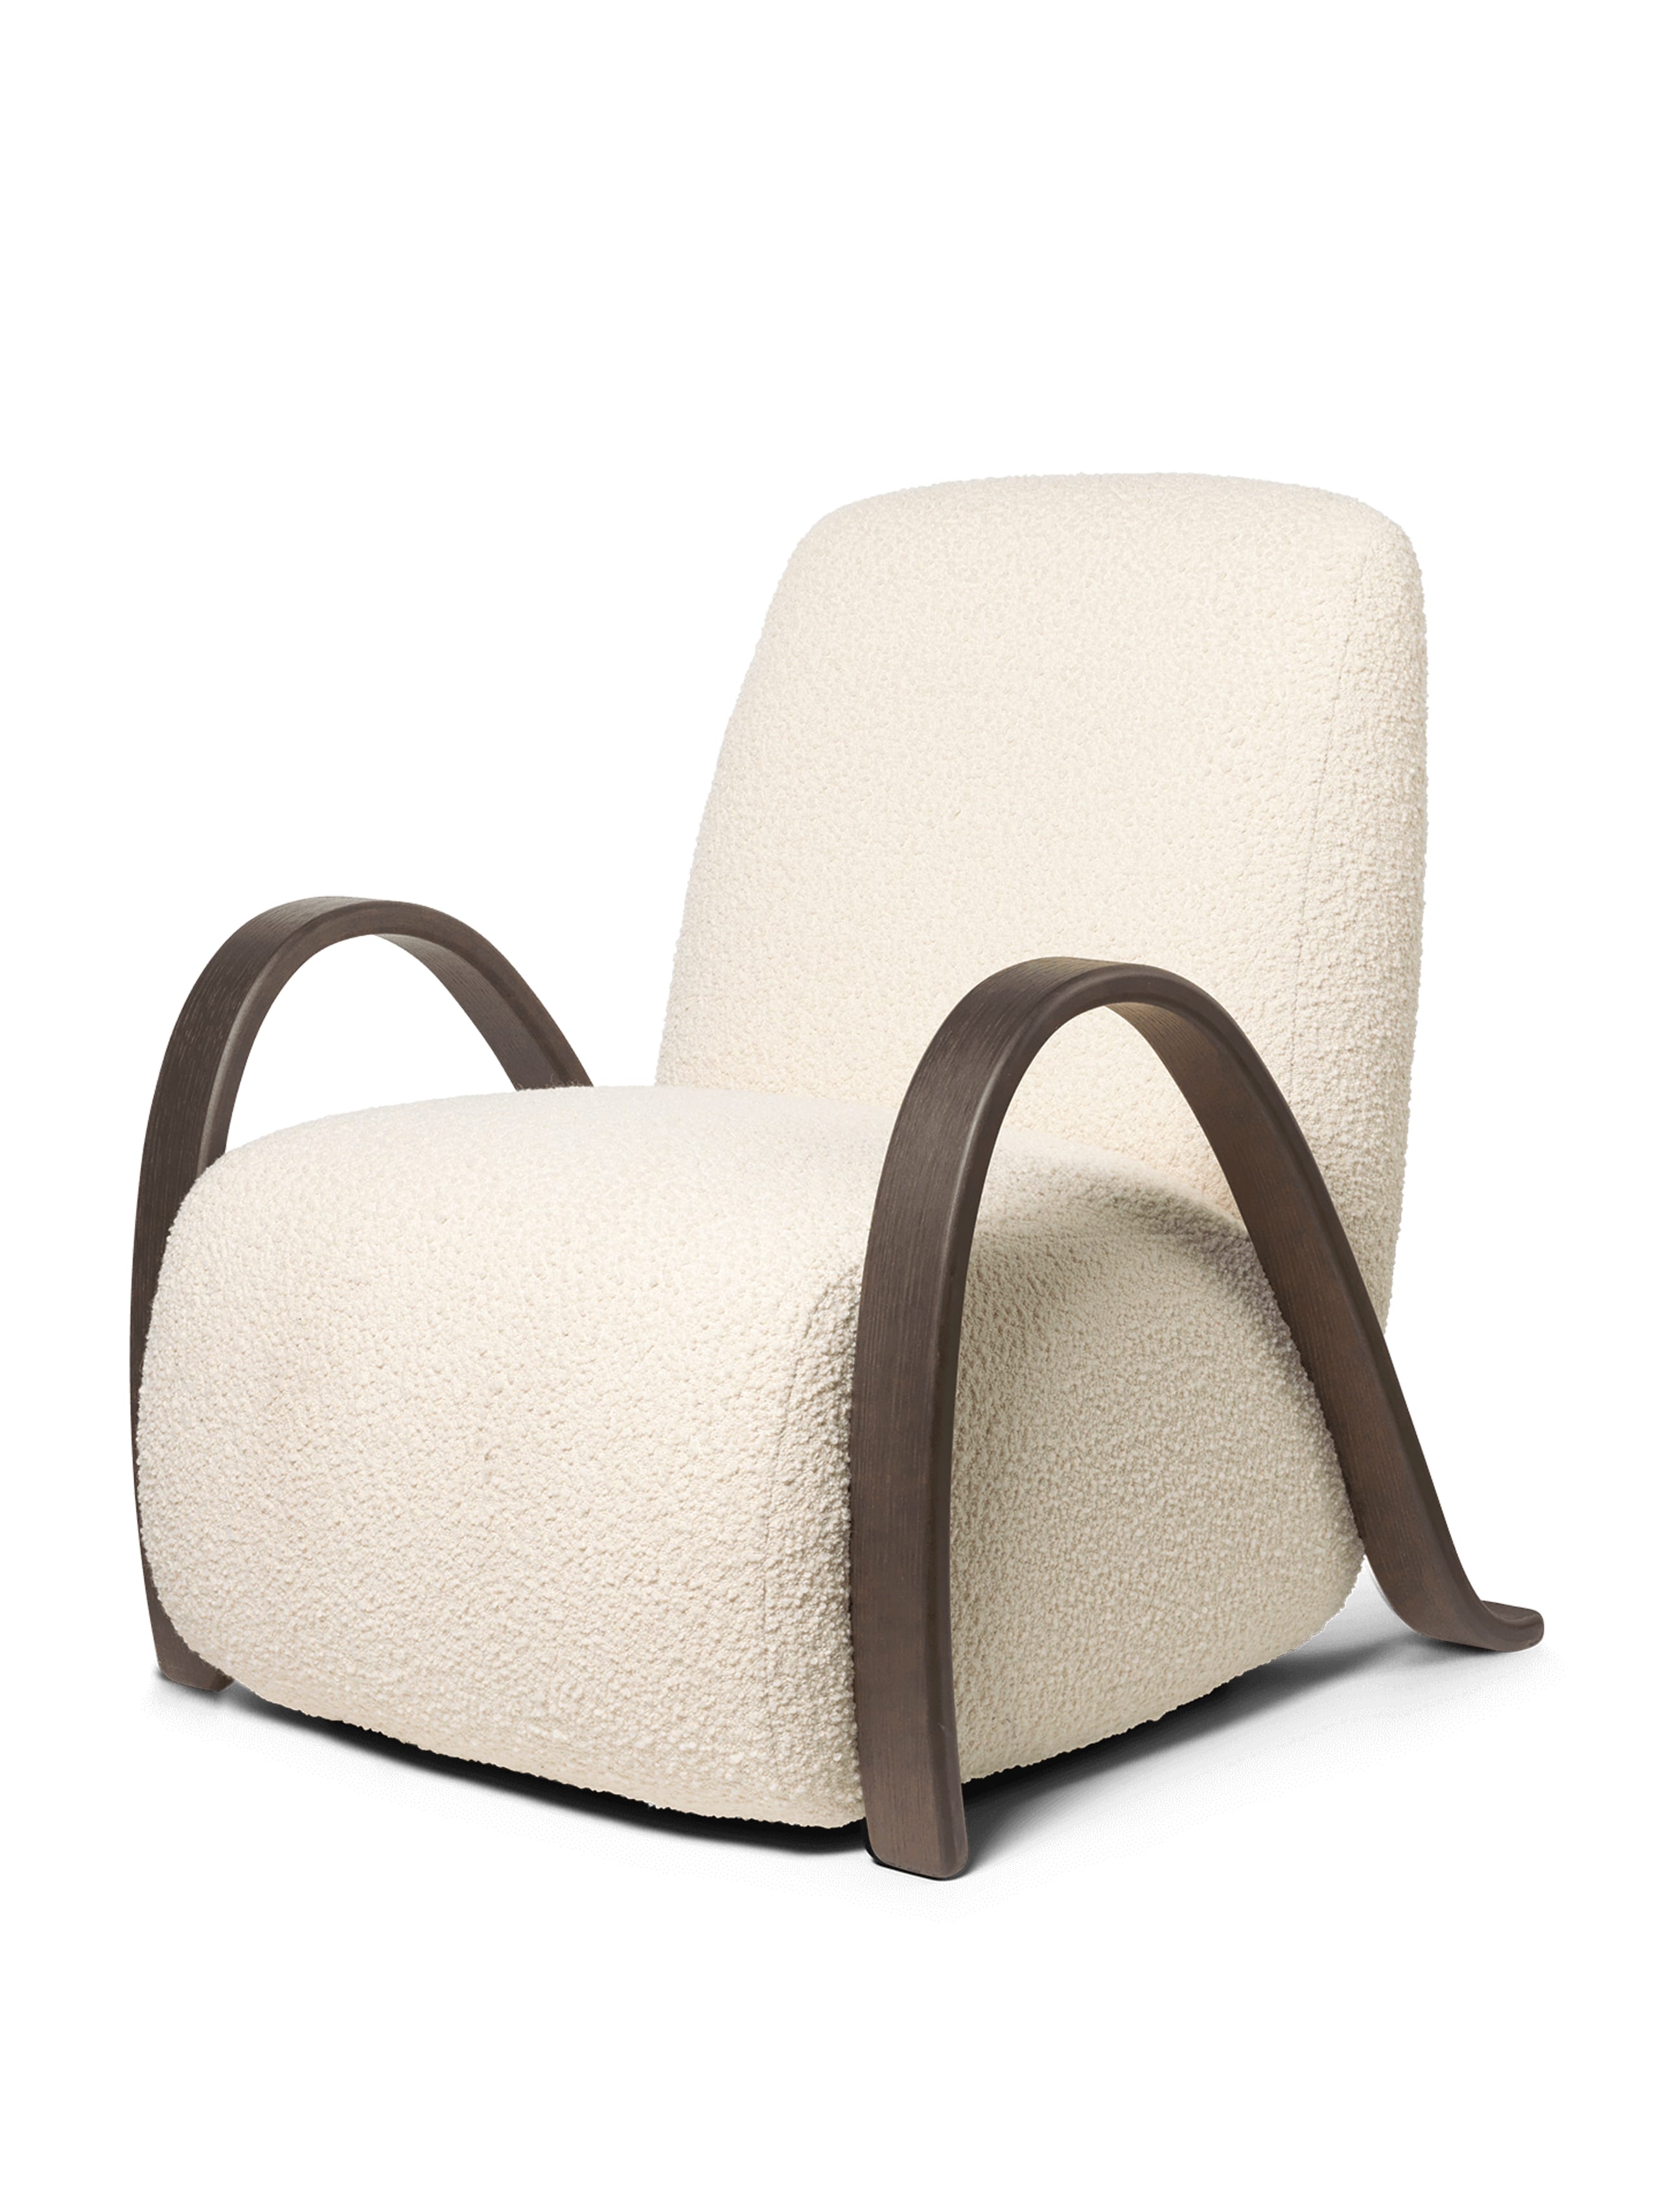 Ferm Living - Loungesessel - Buur Lounge Chair - Buur Lounge Chair Nordic Bouclé - Off-white